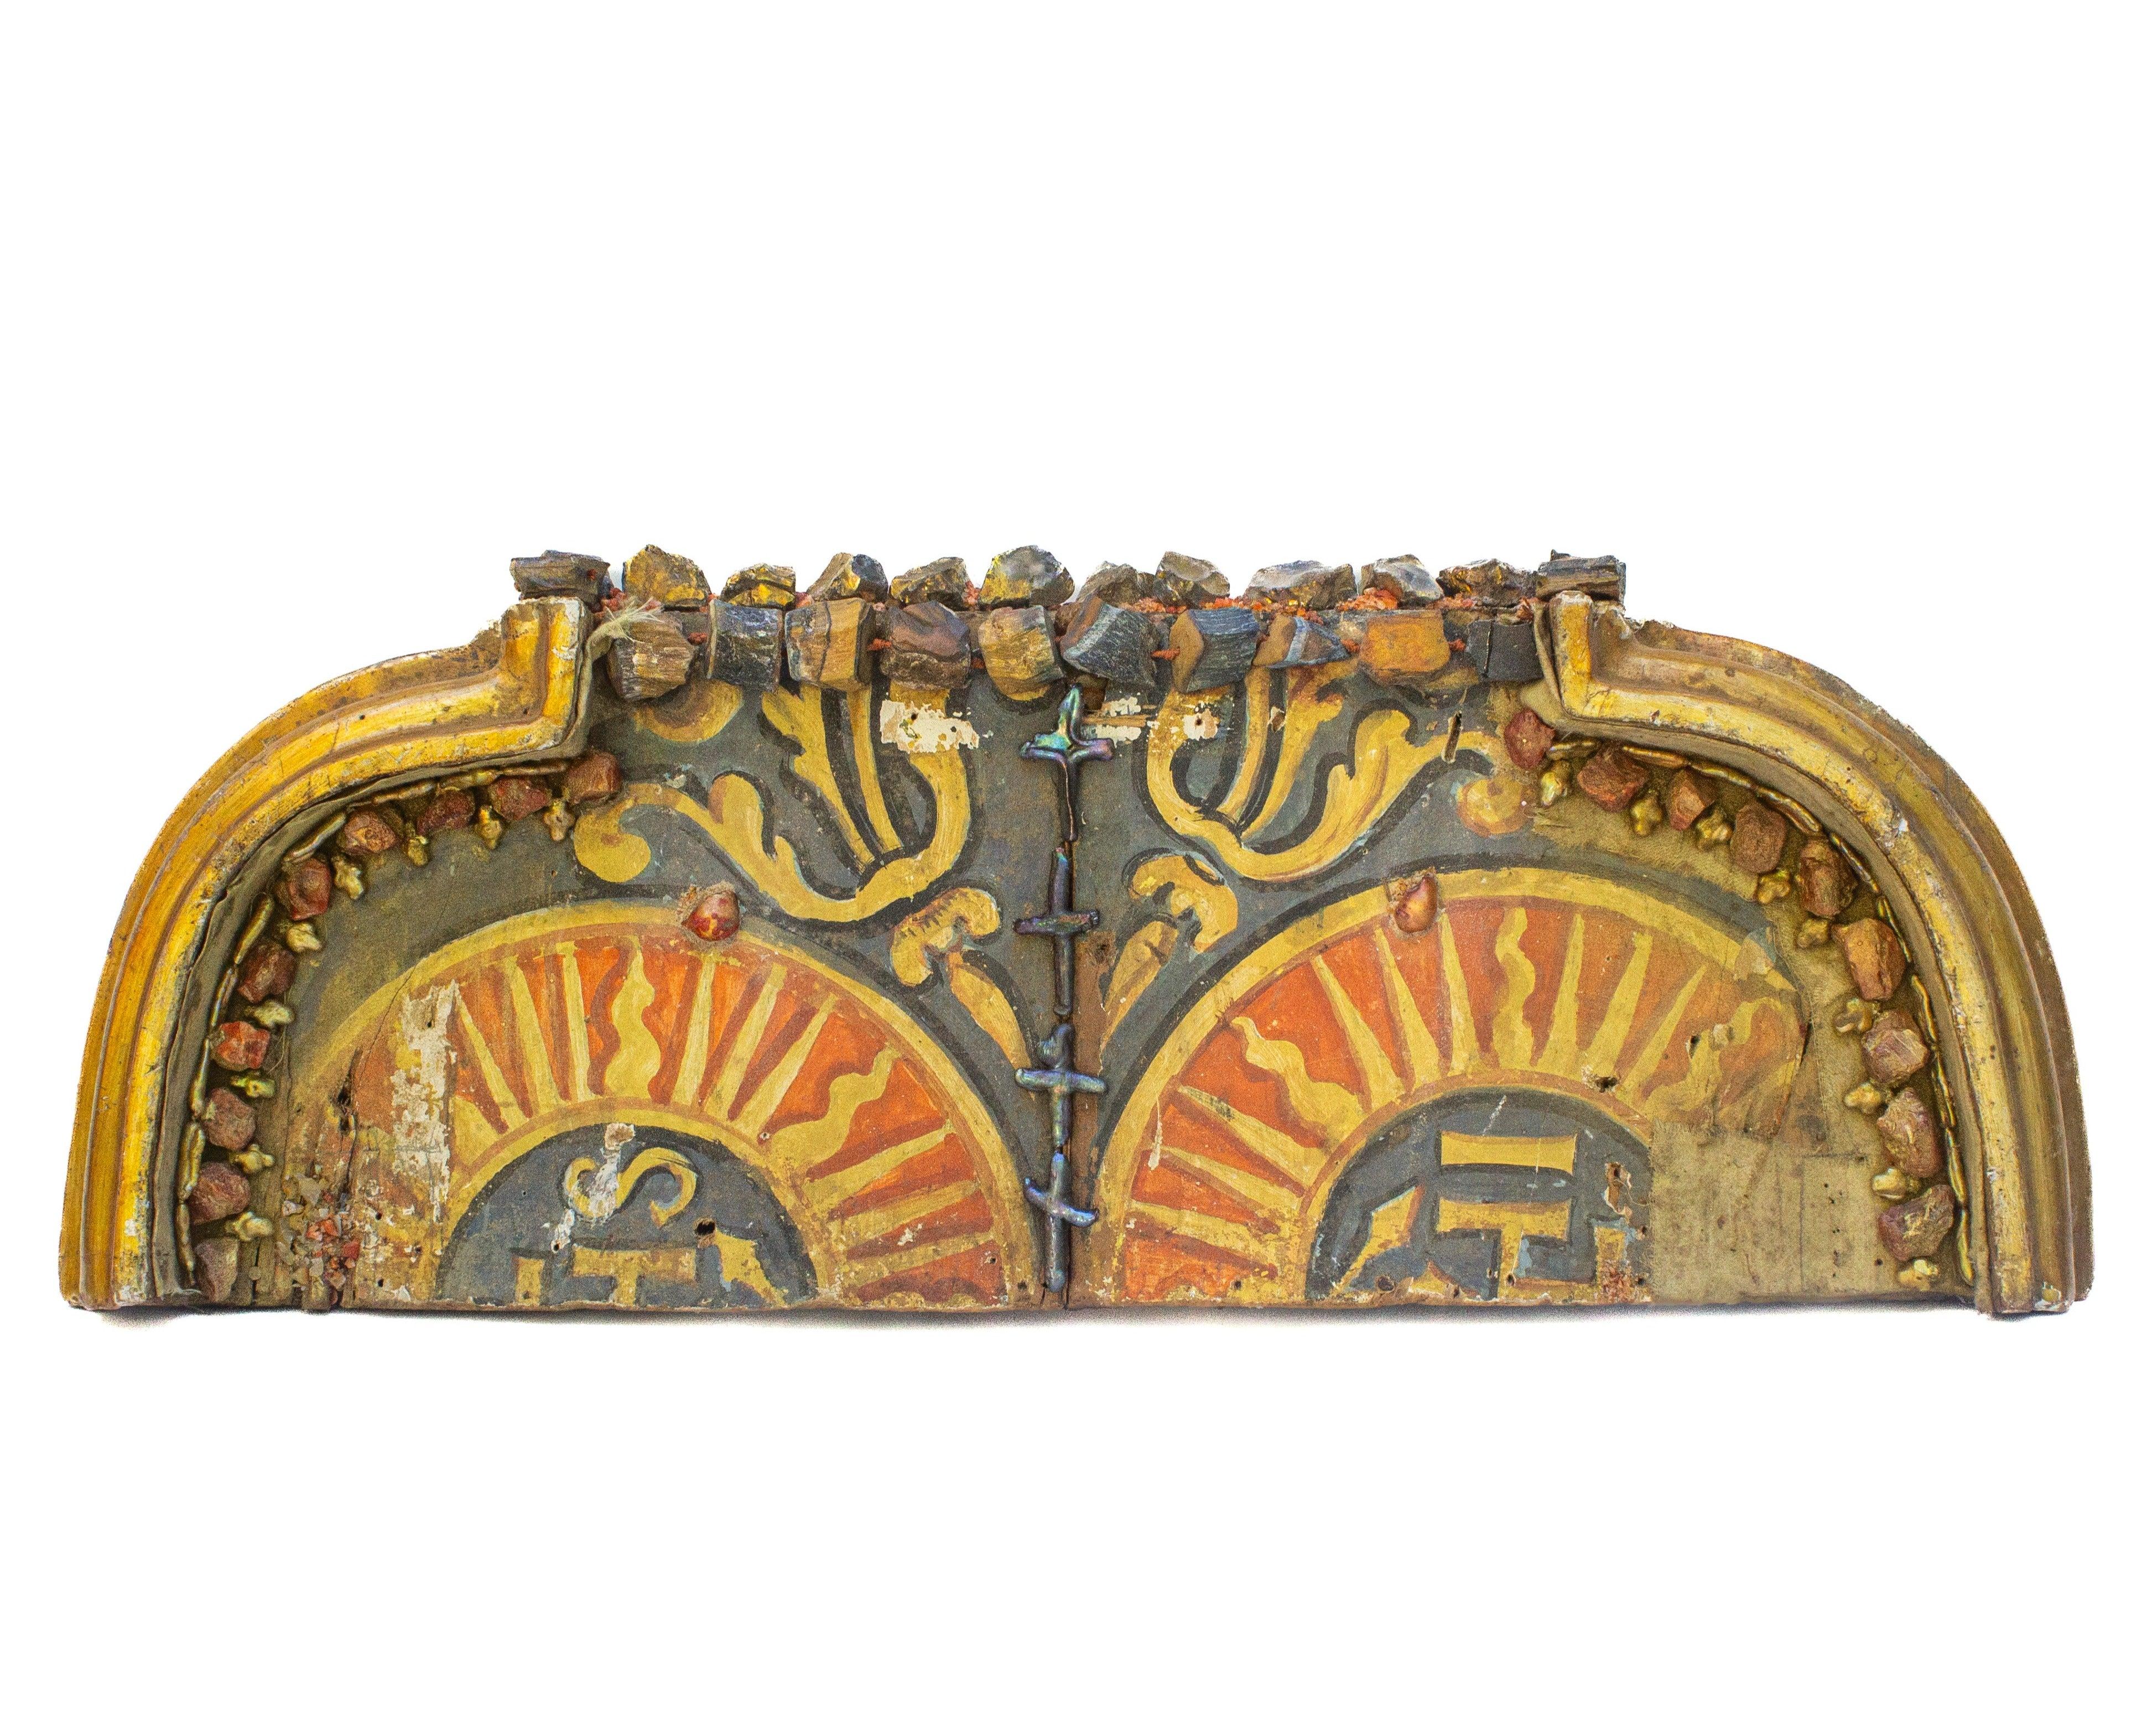 17th century Italian hand-painted ecclesiastical architectural element adorned with carnelian pebbles, gold-plated crystals, blue and yellow raw agate, and baroque pearls.

The fragment artifact came from the interior of a church altar and it was